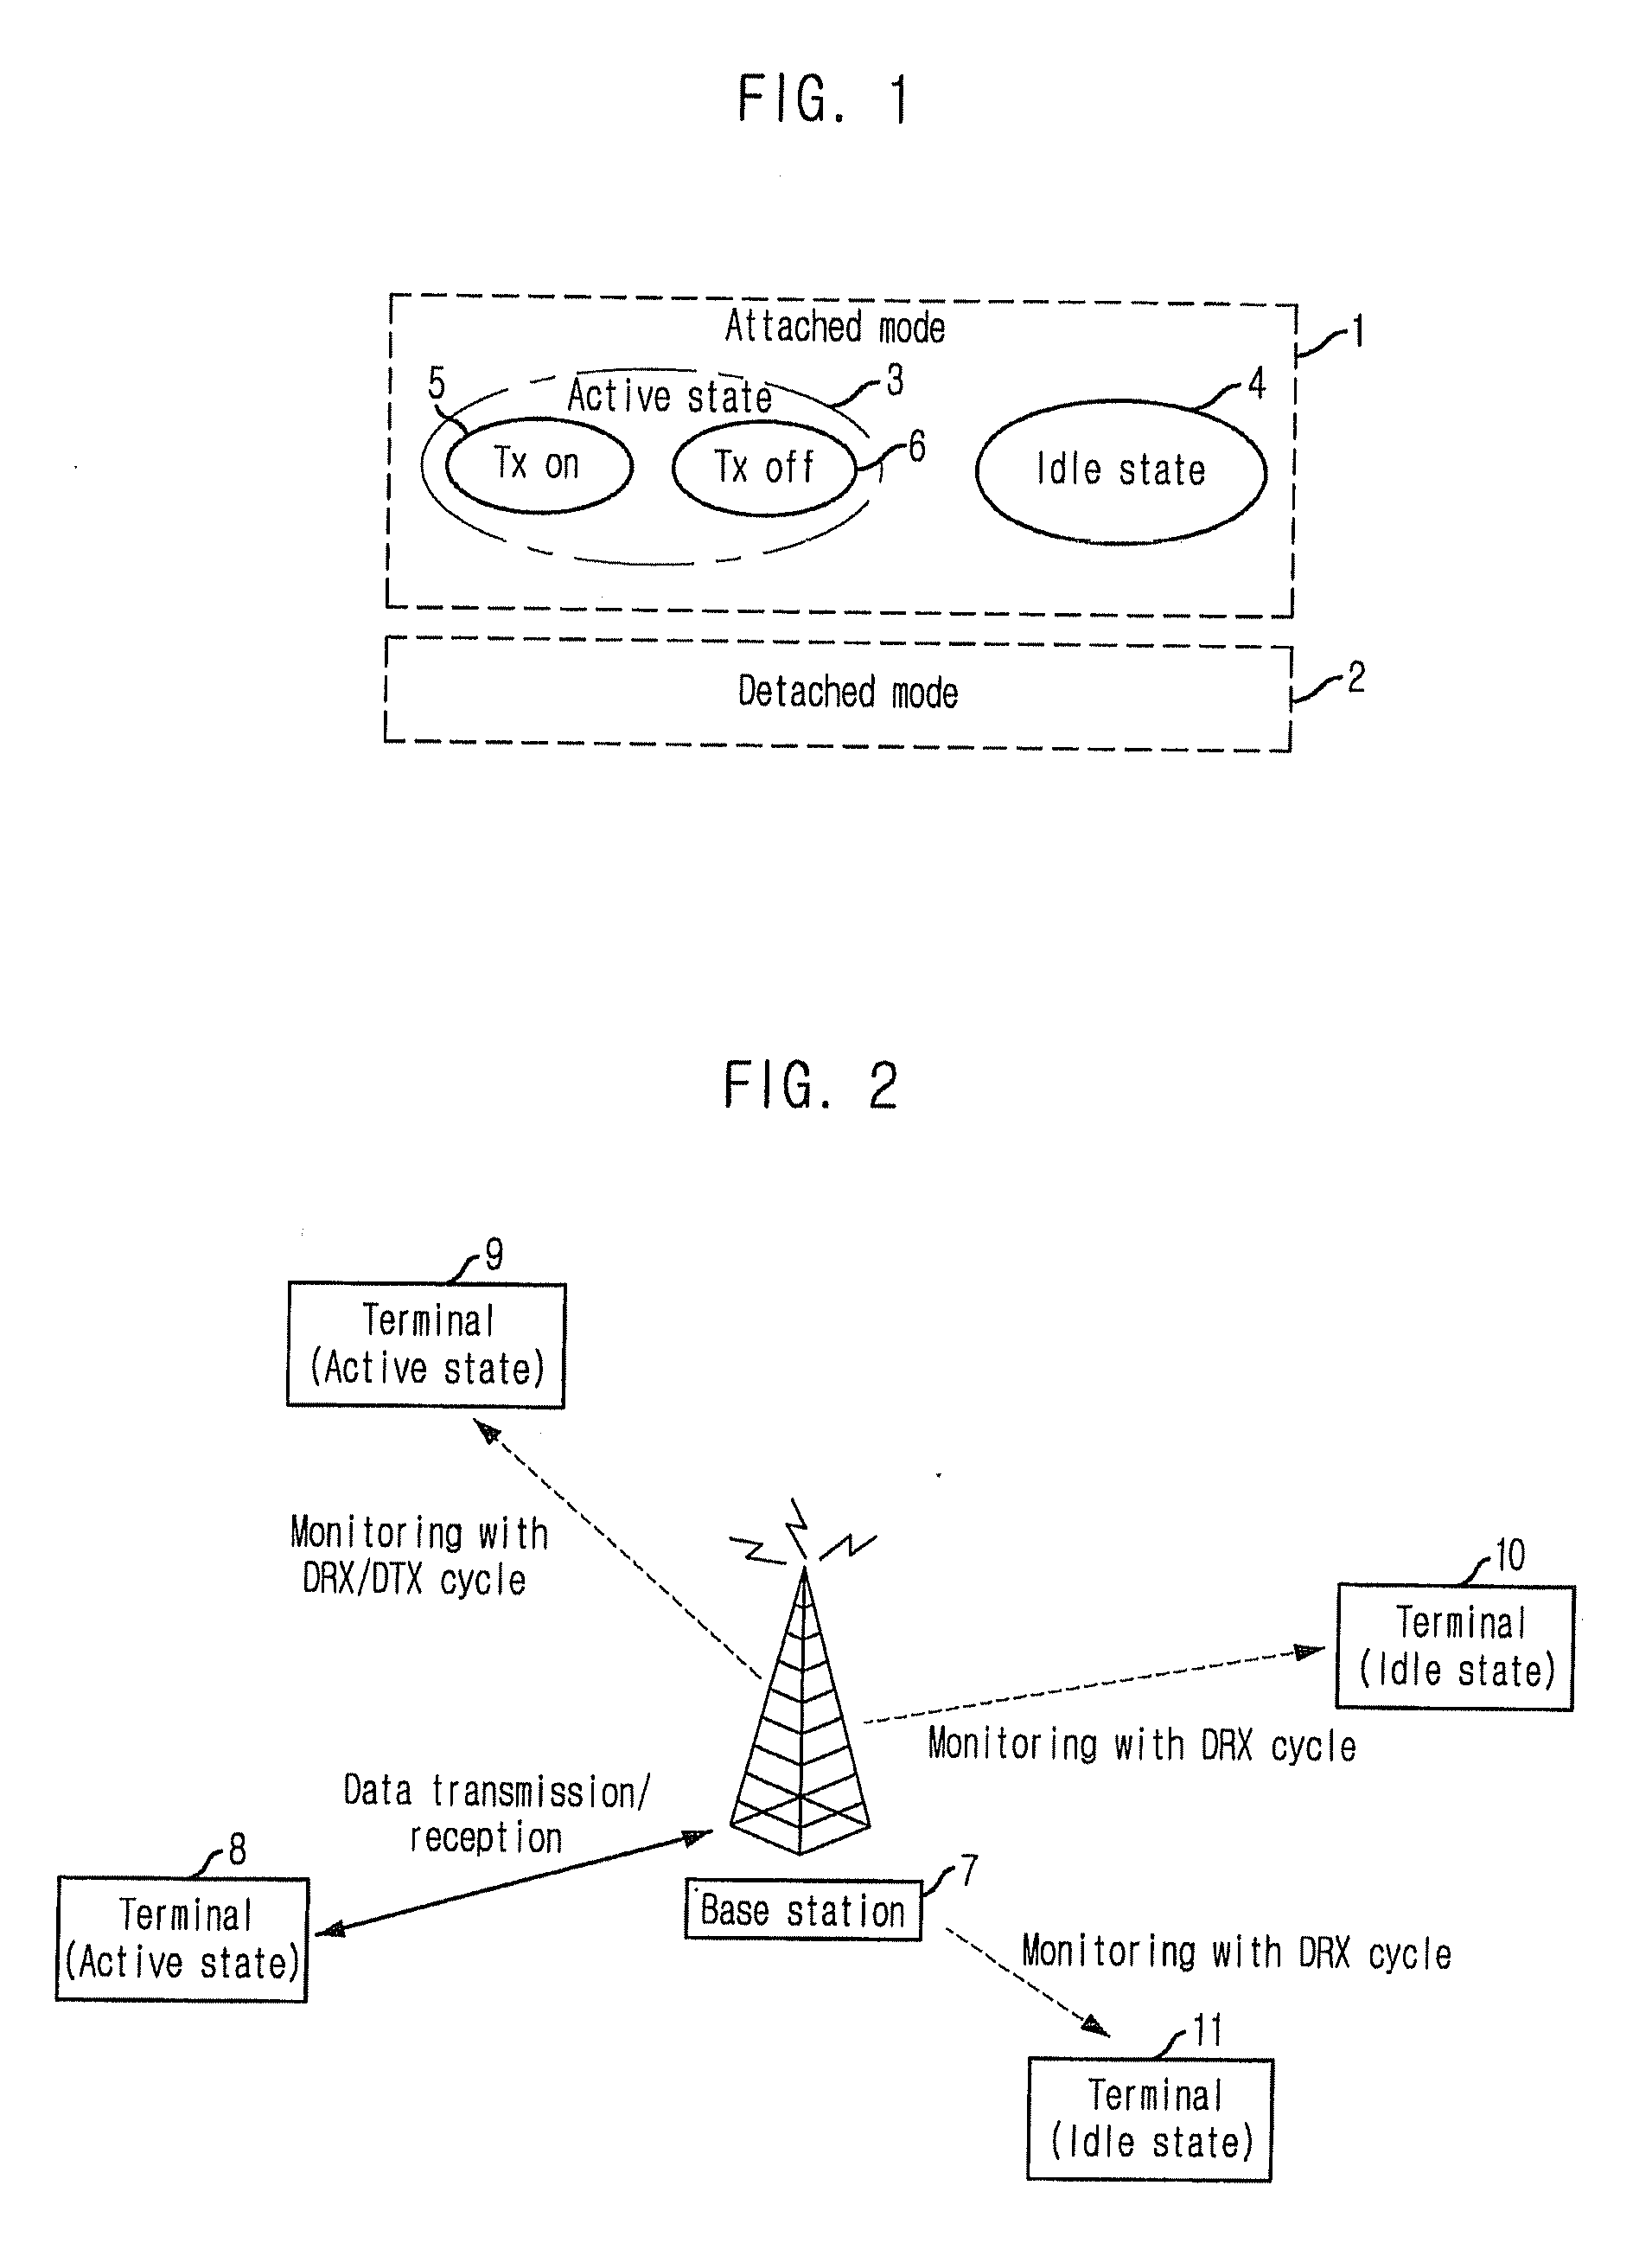 Method and apparatus for discontinuous transmission/reception operation for reducing power consumption in cellular system